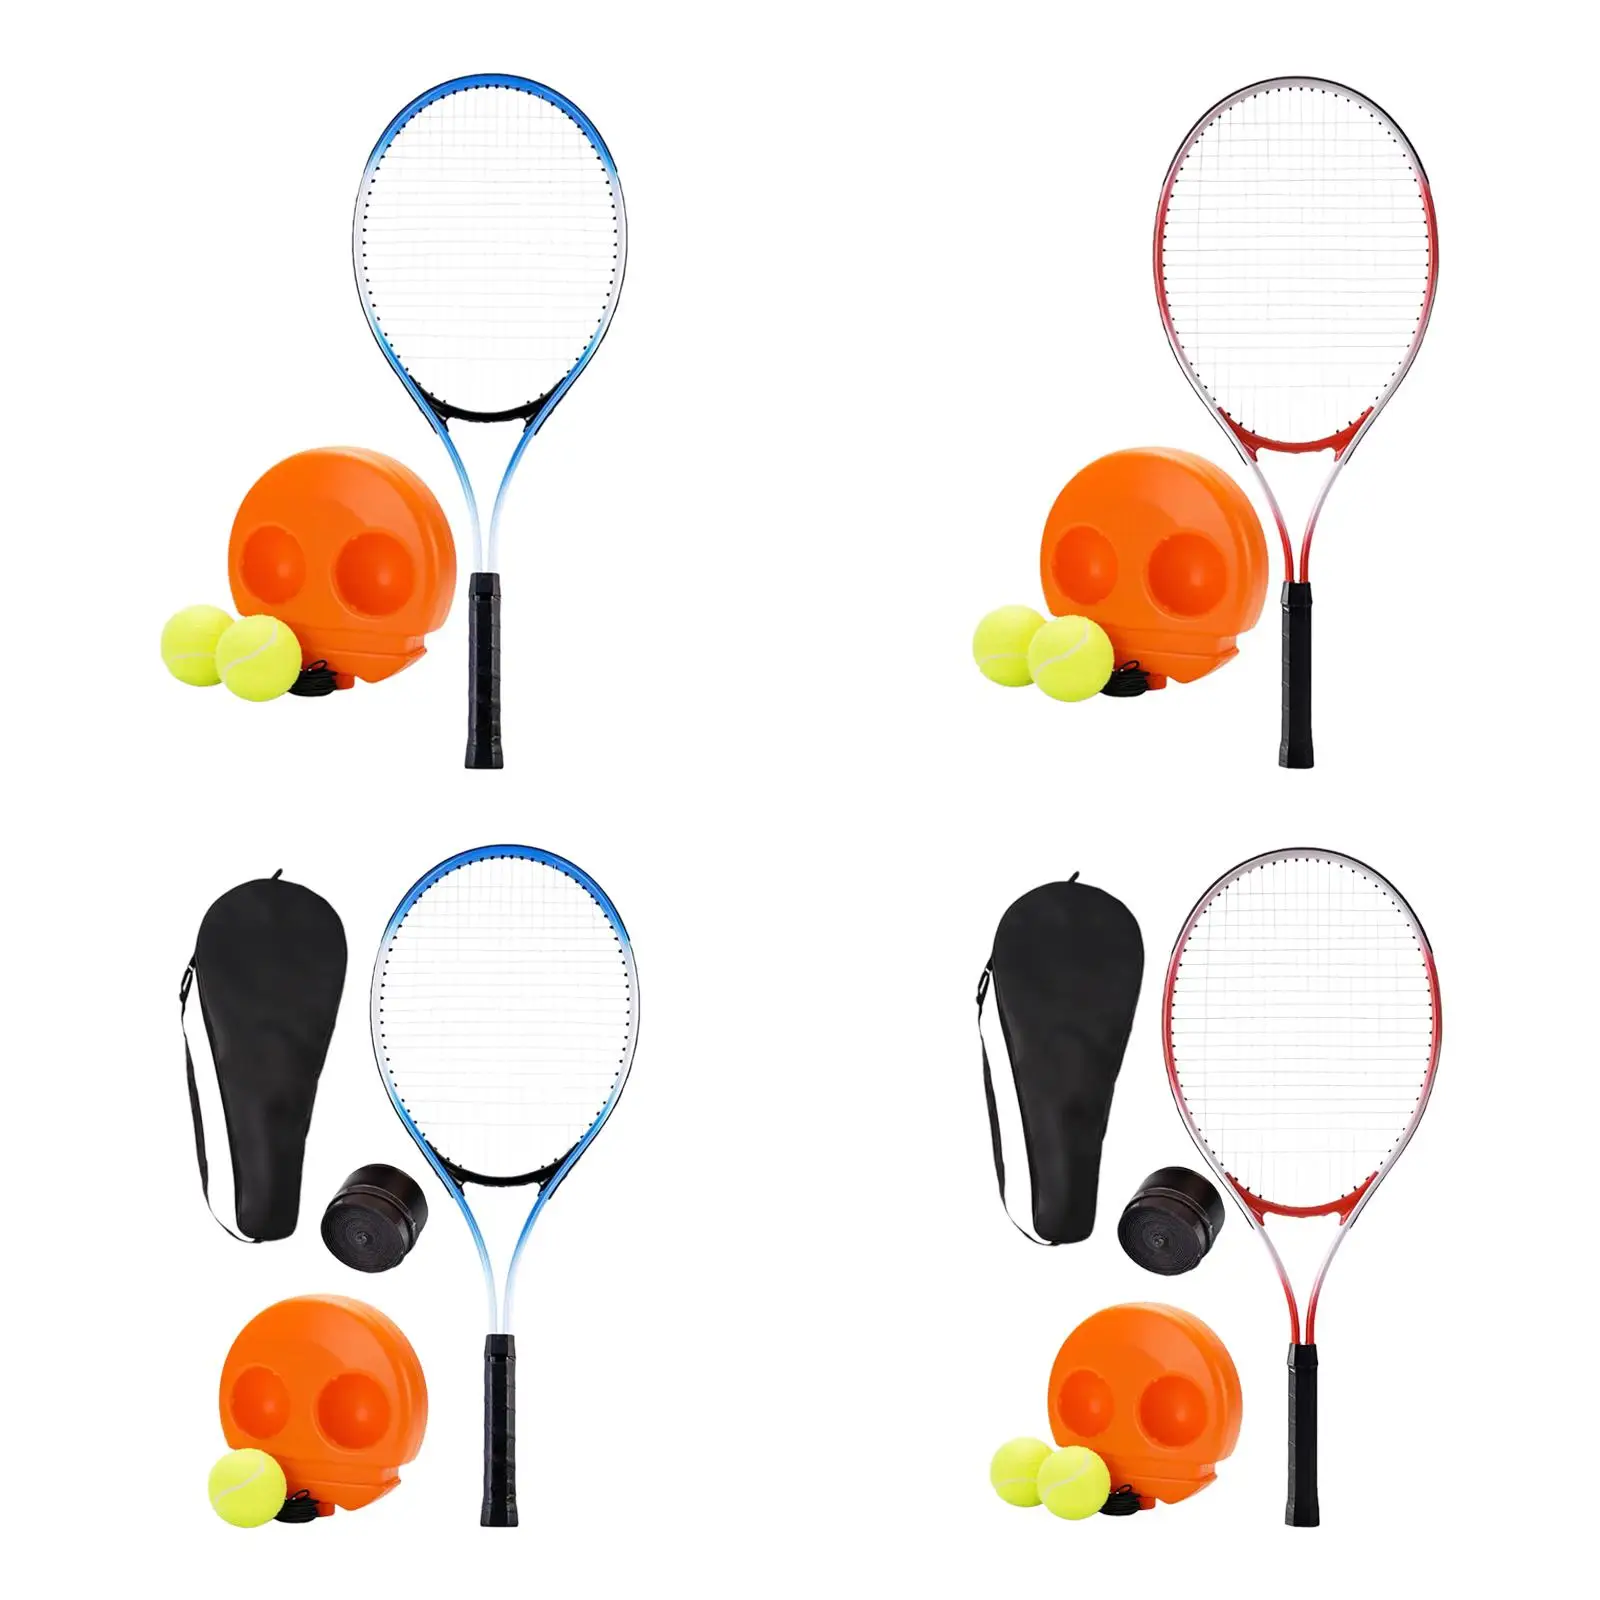 

Solo Tennis Trainer Rebound Ball Solo Tennis Training Aid Portable Park Single Player Garden Solo Training Tool for Adults